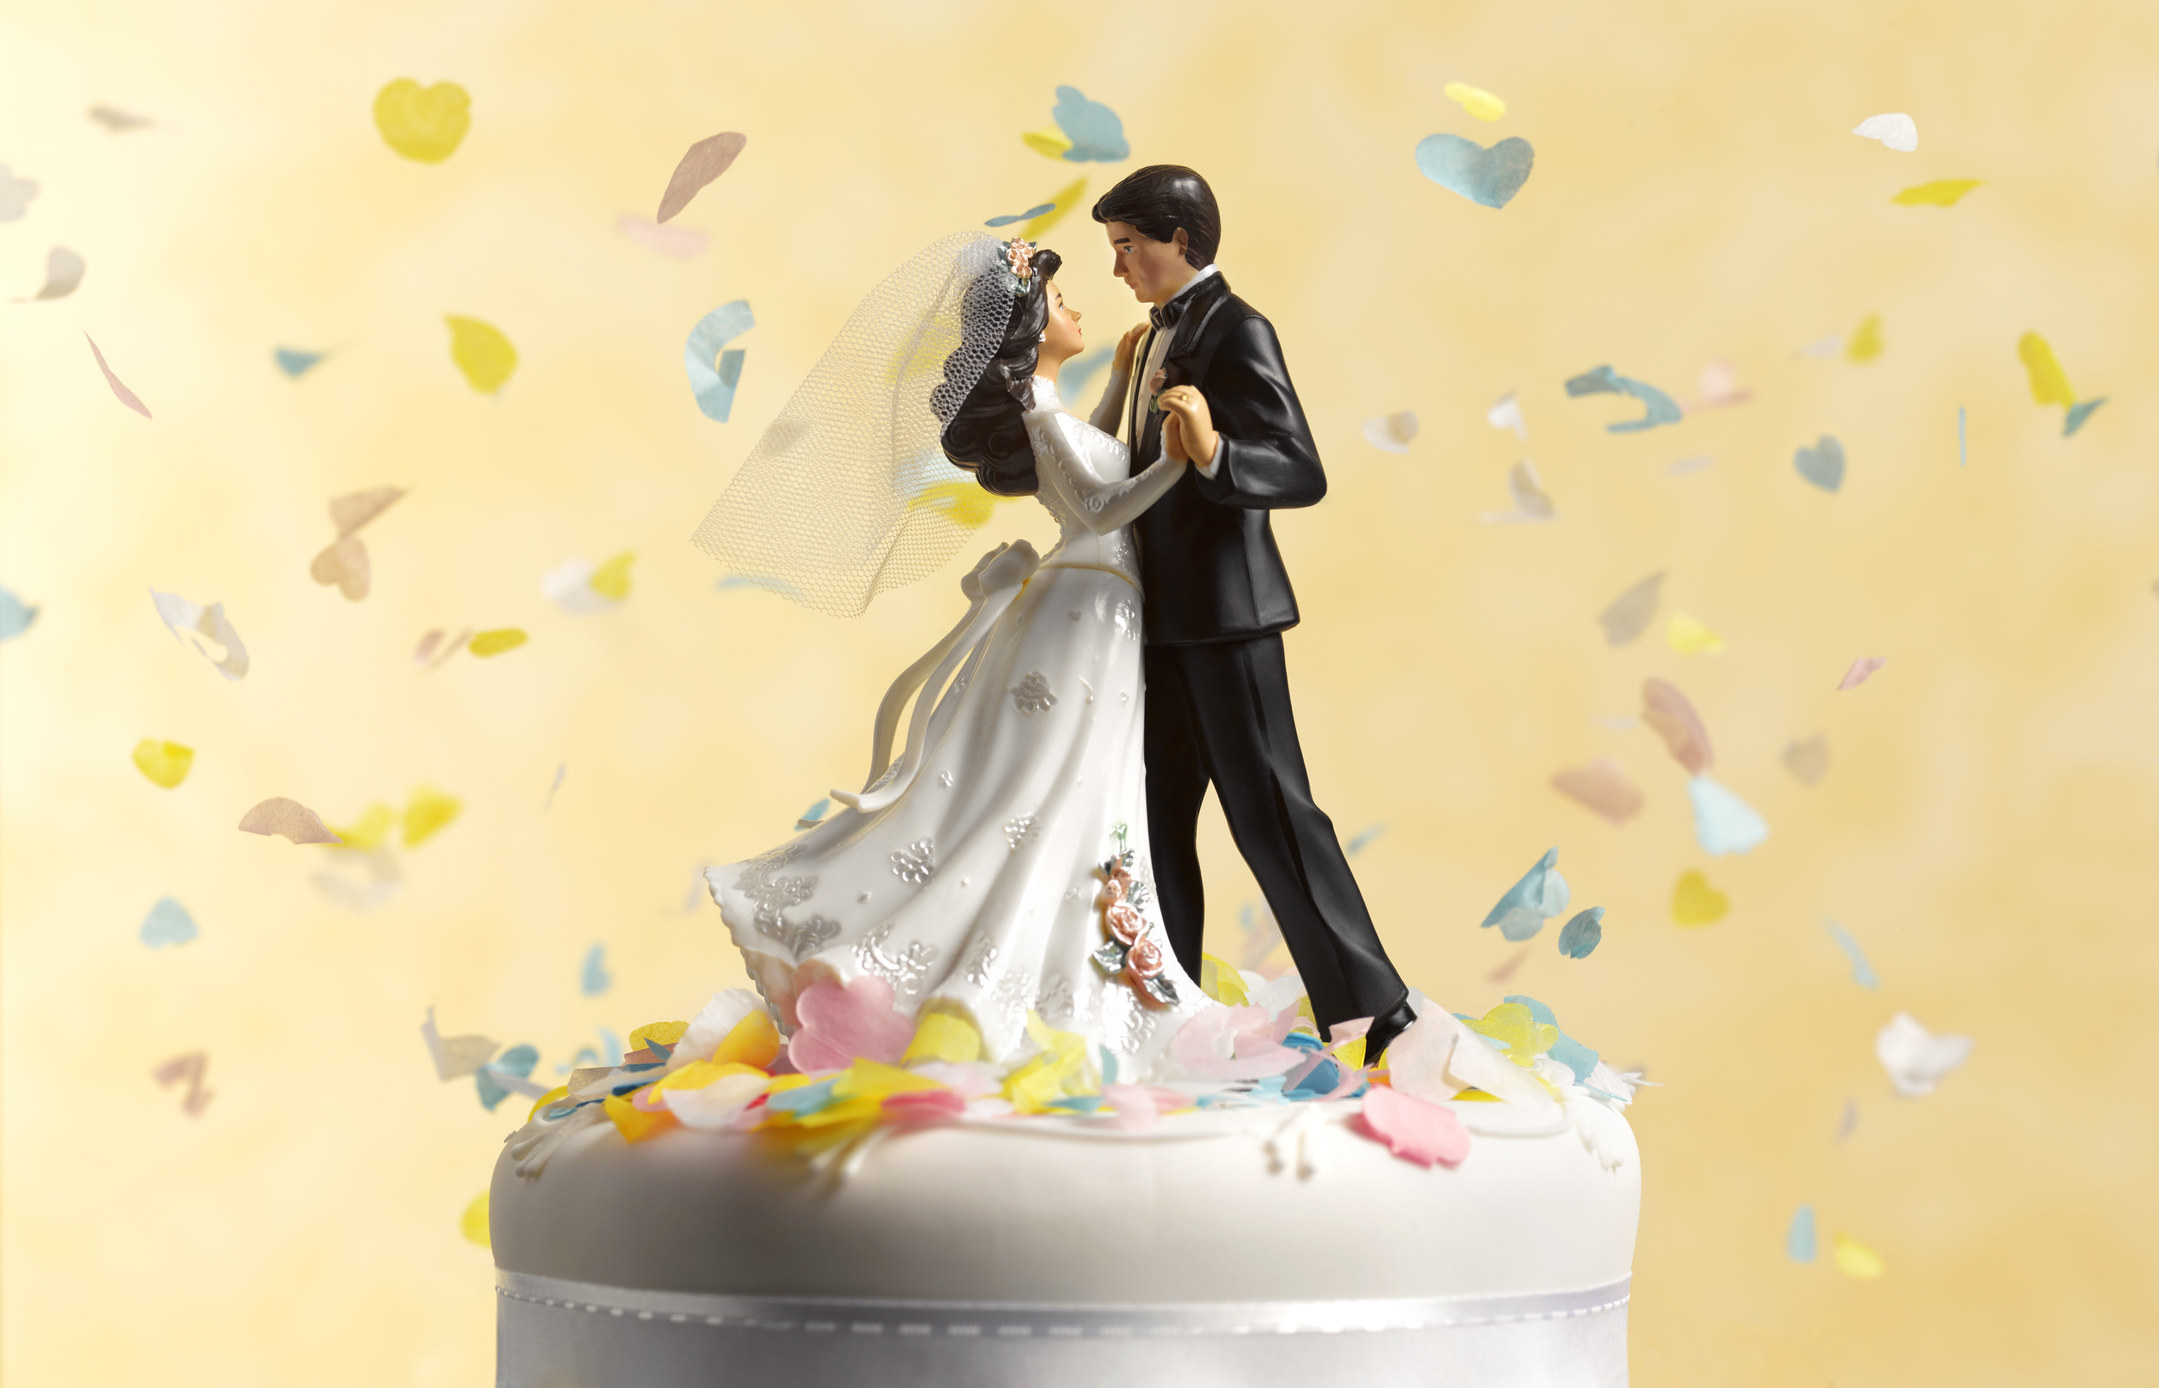 A wedding cake topper against a yellow background